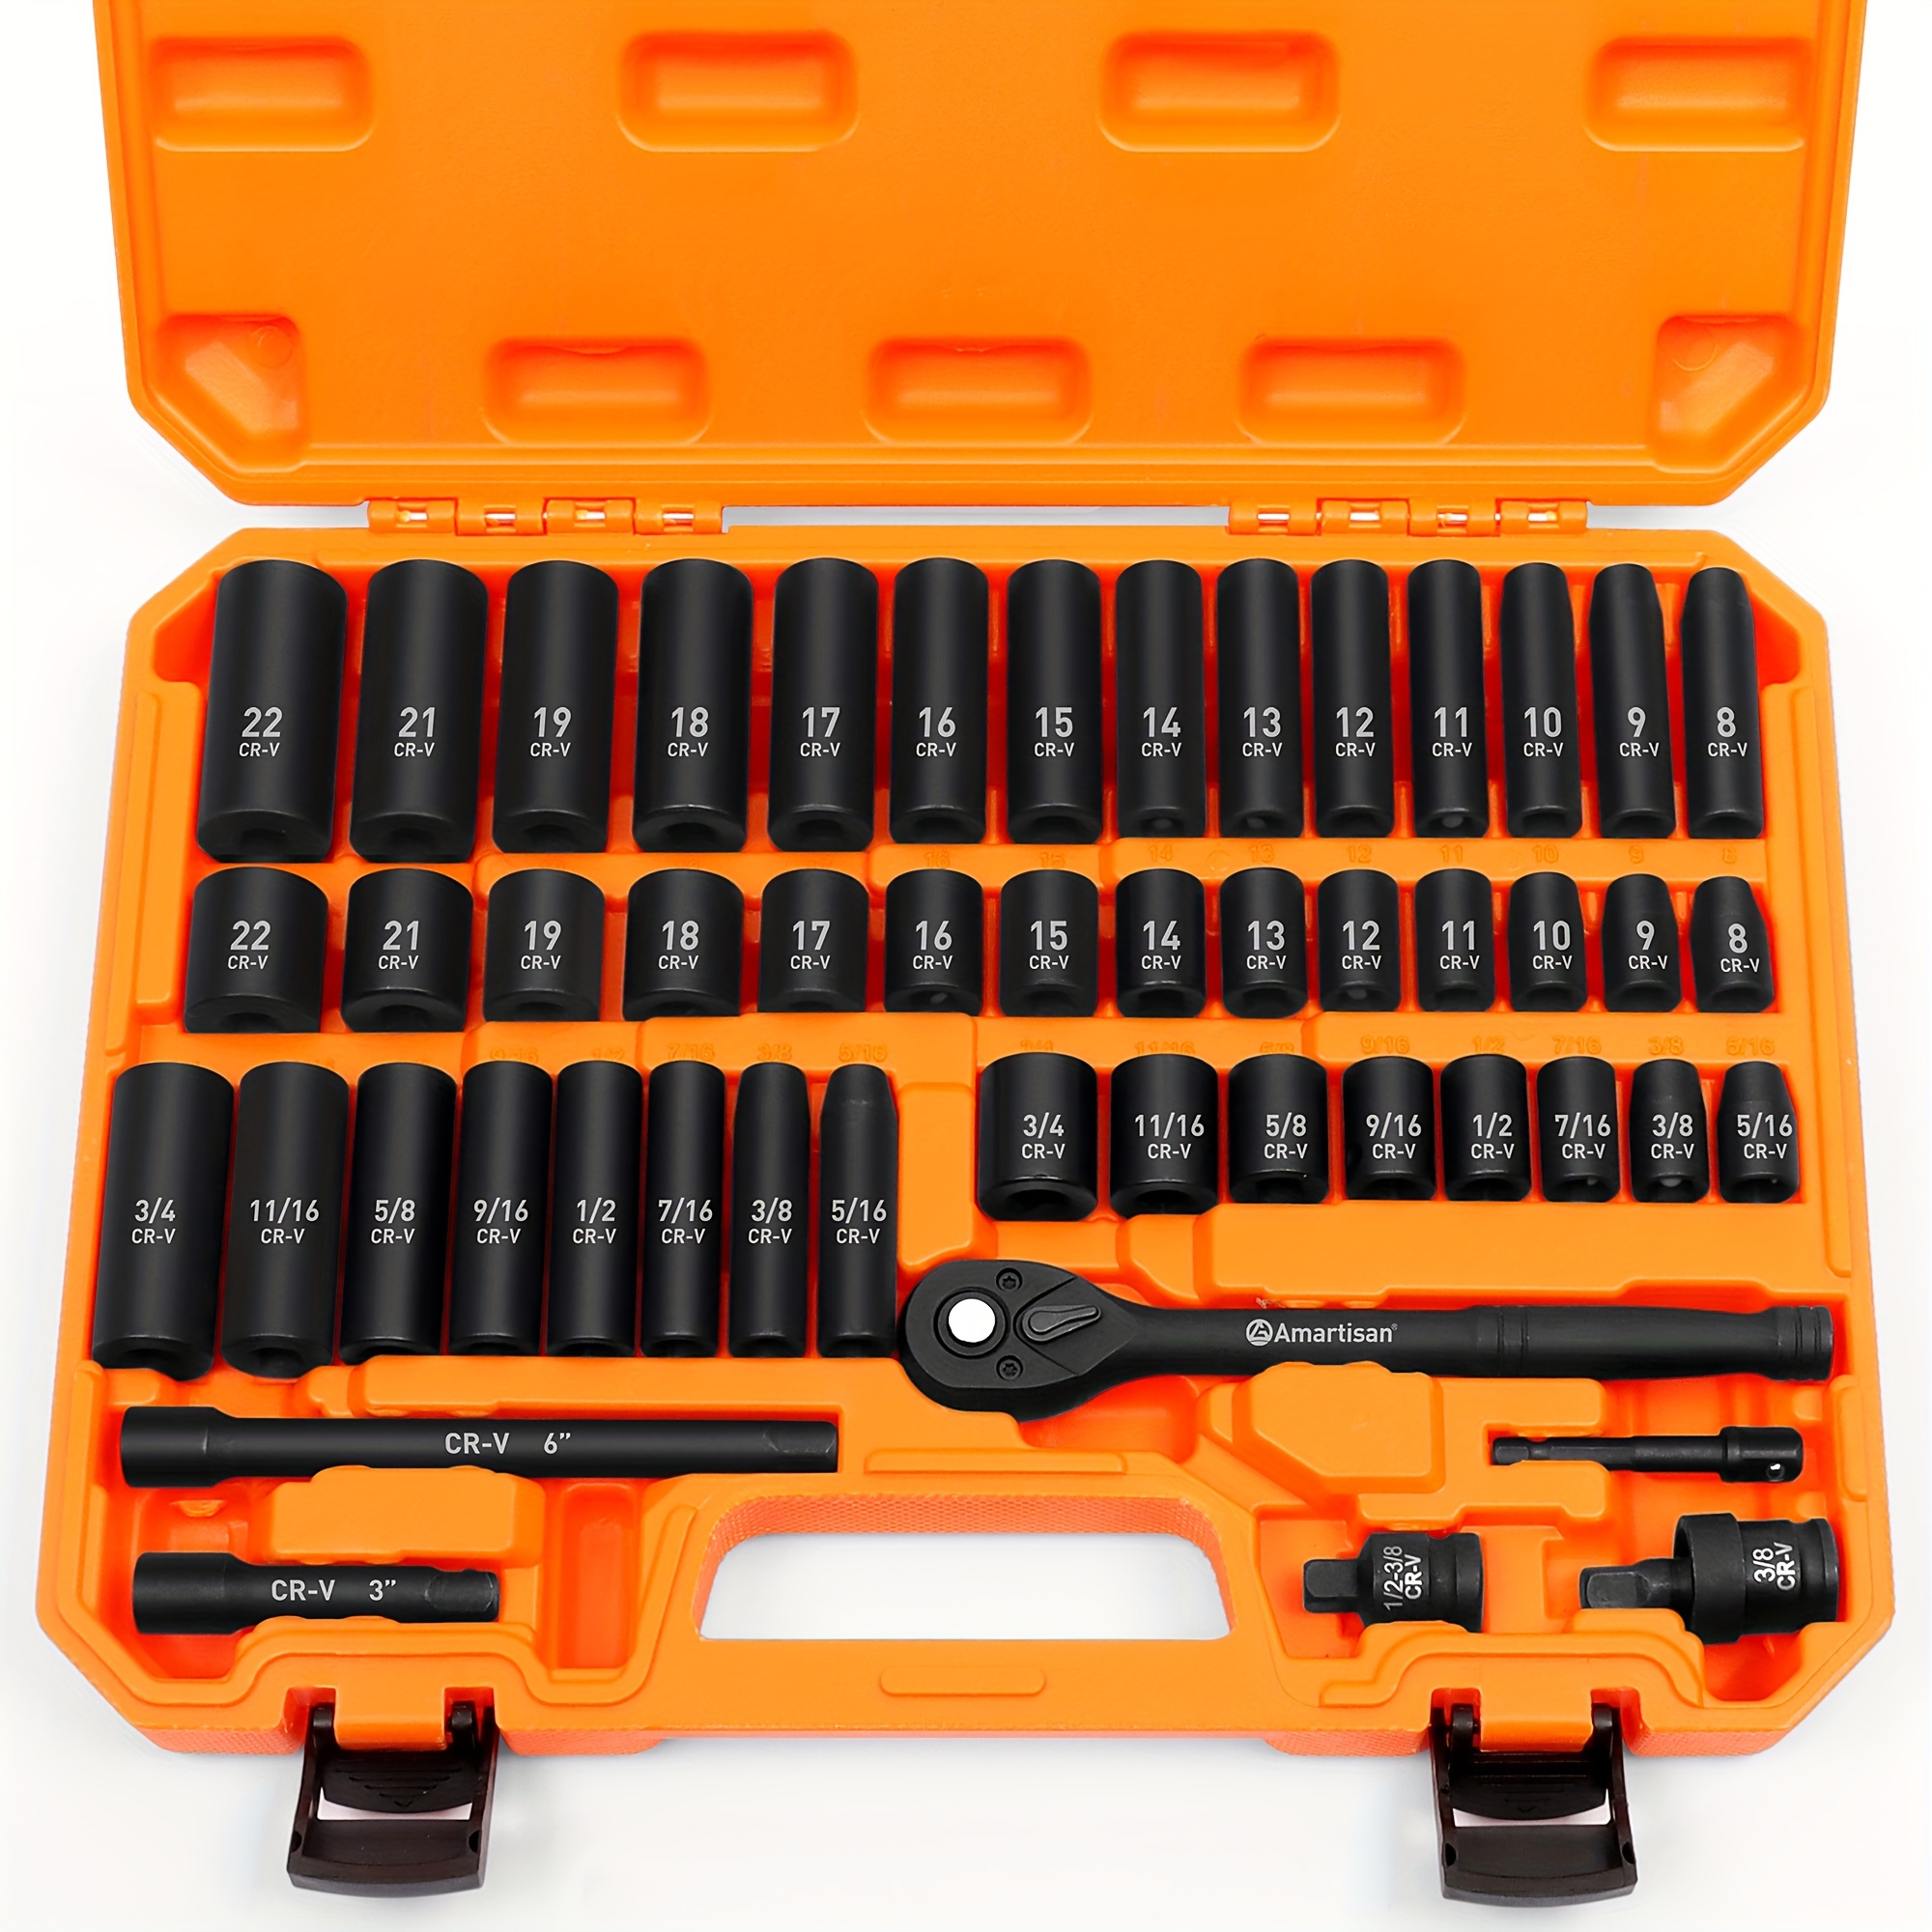 

50pcs 3/8" Drive Impact Socket Set, 6 Point, 50pcs Standard Metric (8-22mm) And Sae (5/16 Inches To 3/4 Inches) Cr-v Steel Sockets With Adapters & Ratchet Handle